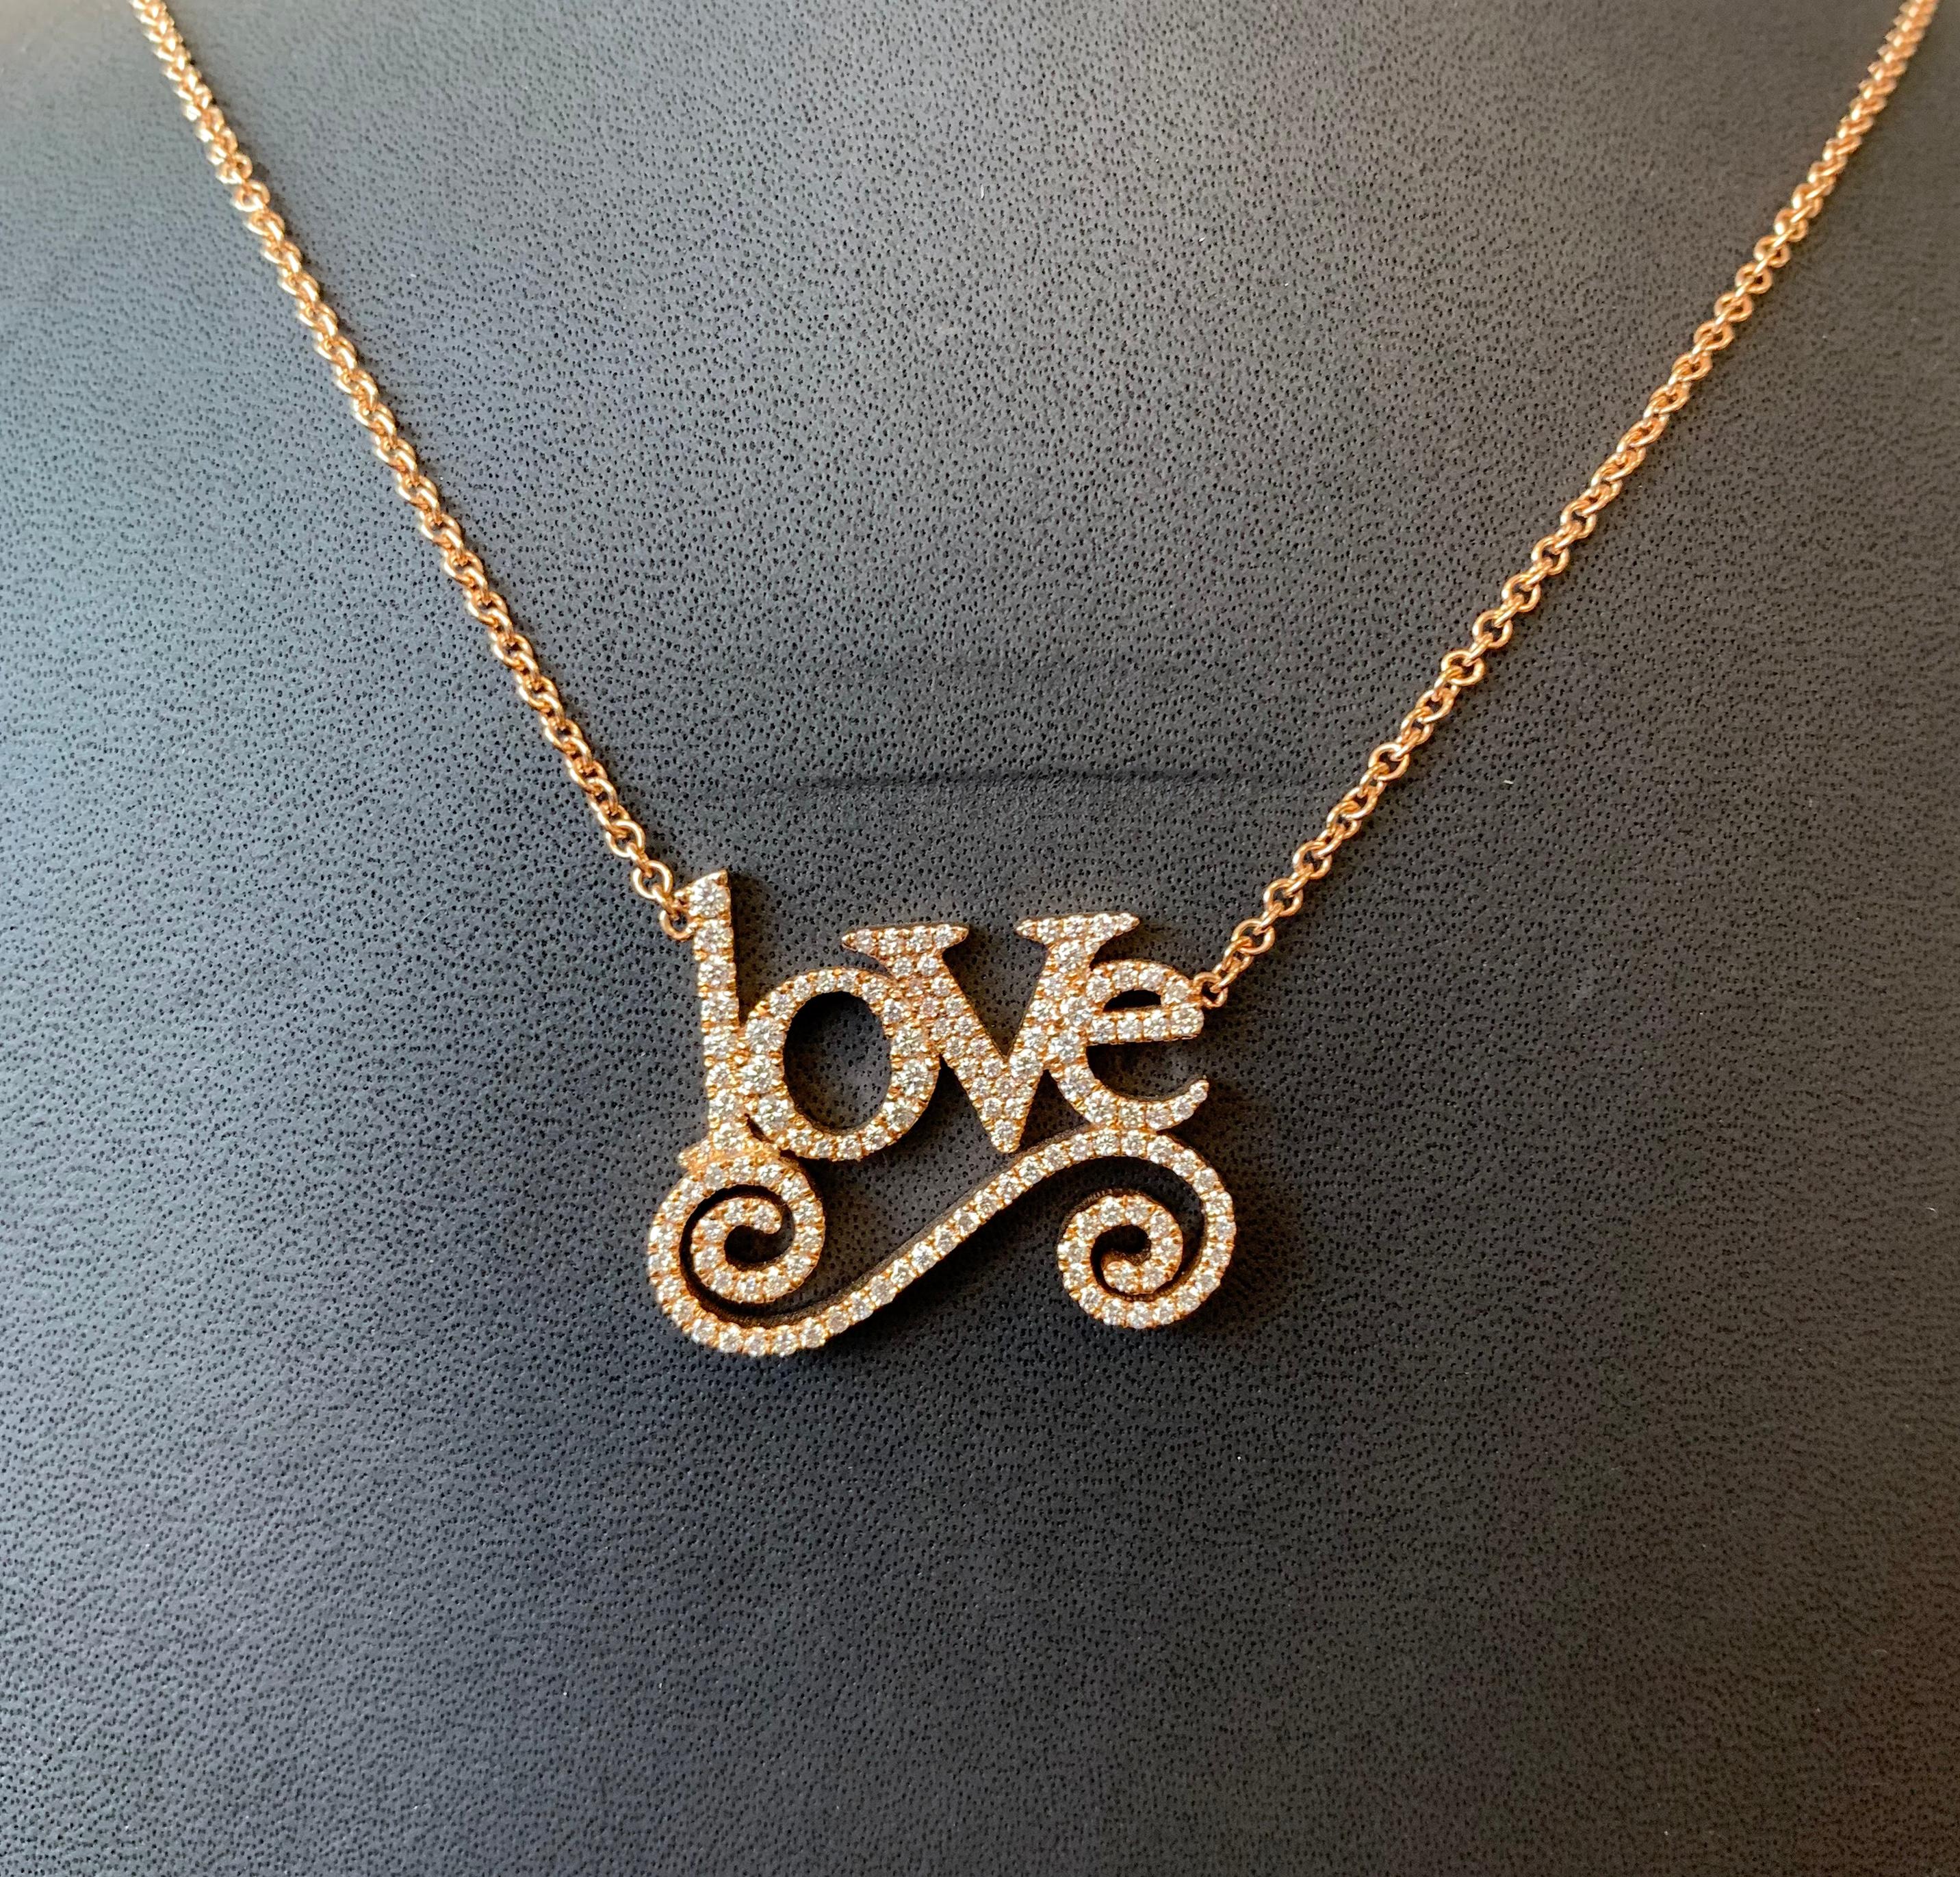 The Love Pendant
White Diamonds set on Rose Gold.
Crafted to order. Please allow up to 3 weeks for delivery.